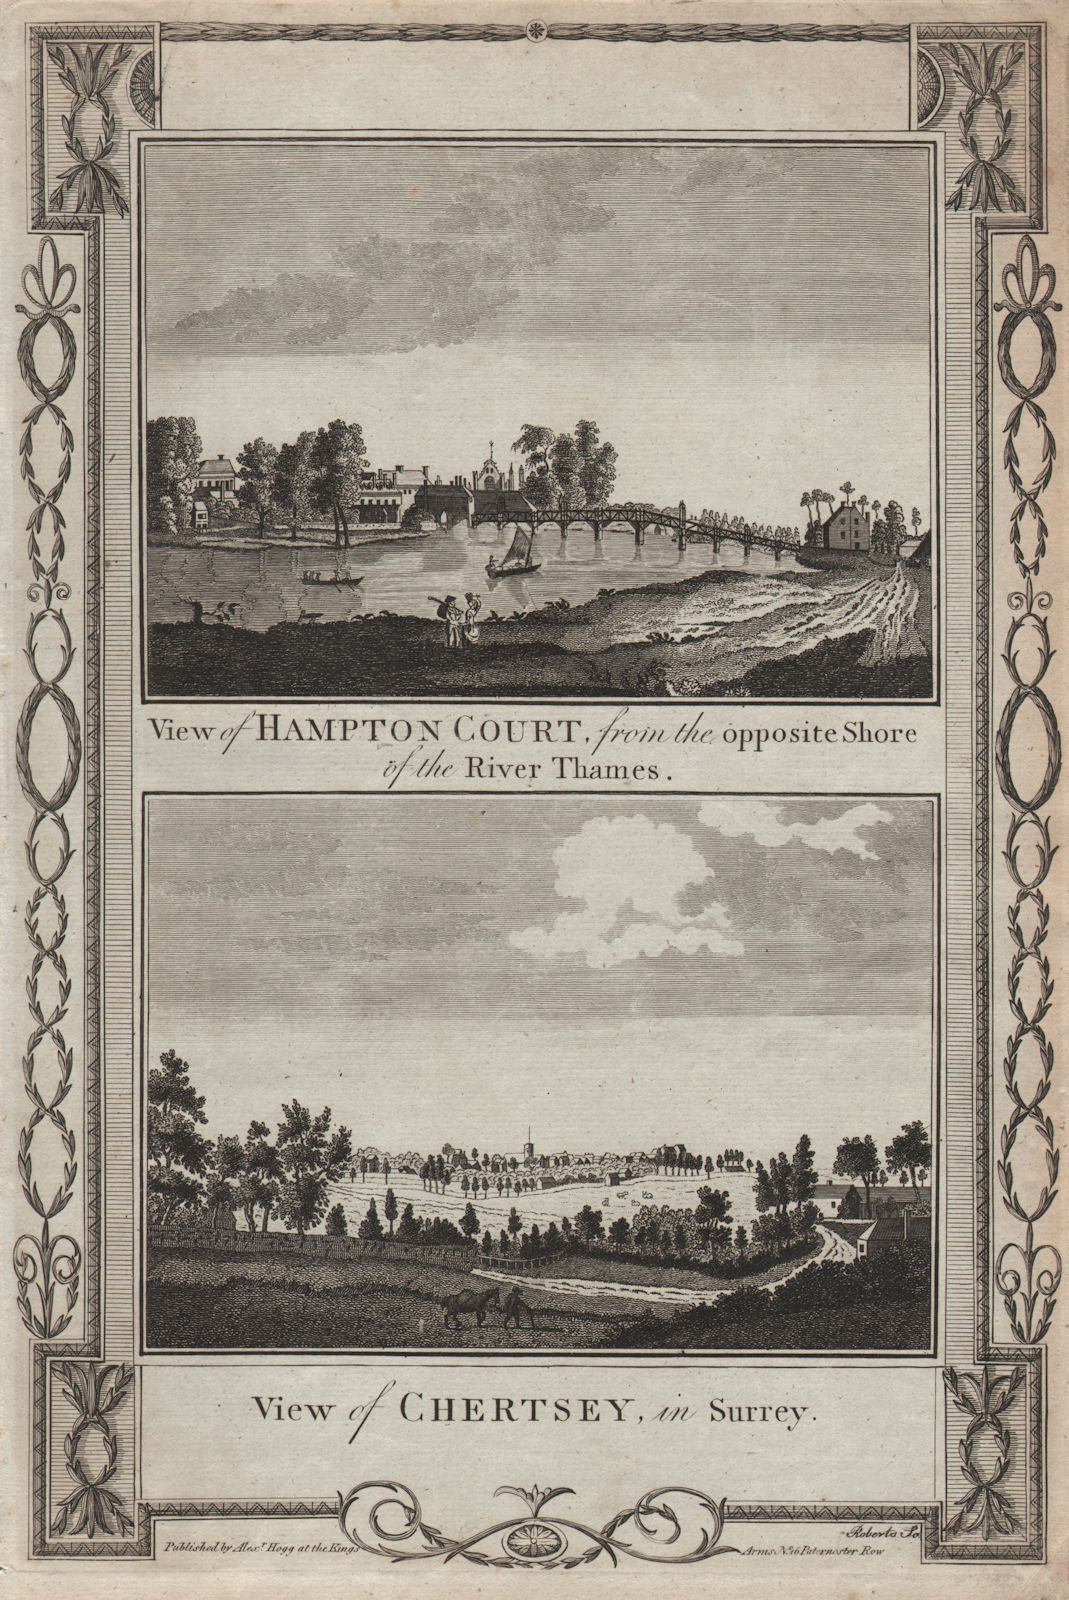 Associate Product Views of Hampton Court, from East Molesey & Chertsey, in Surrey. THORNTON 1784